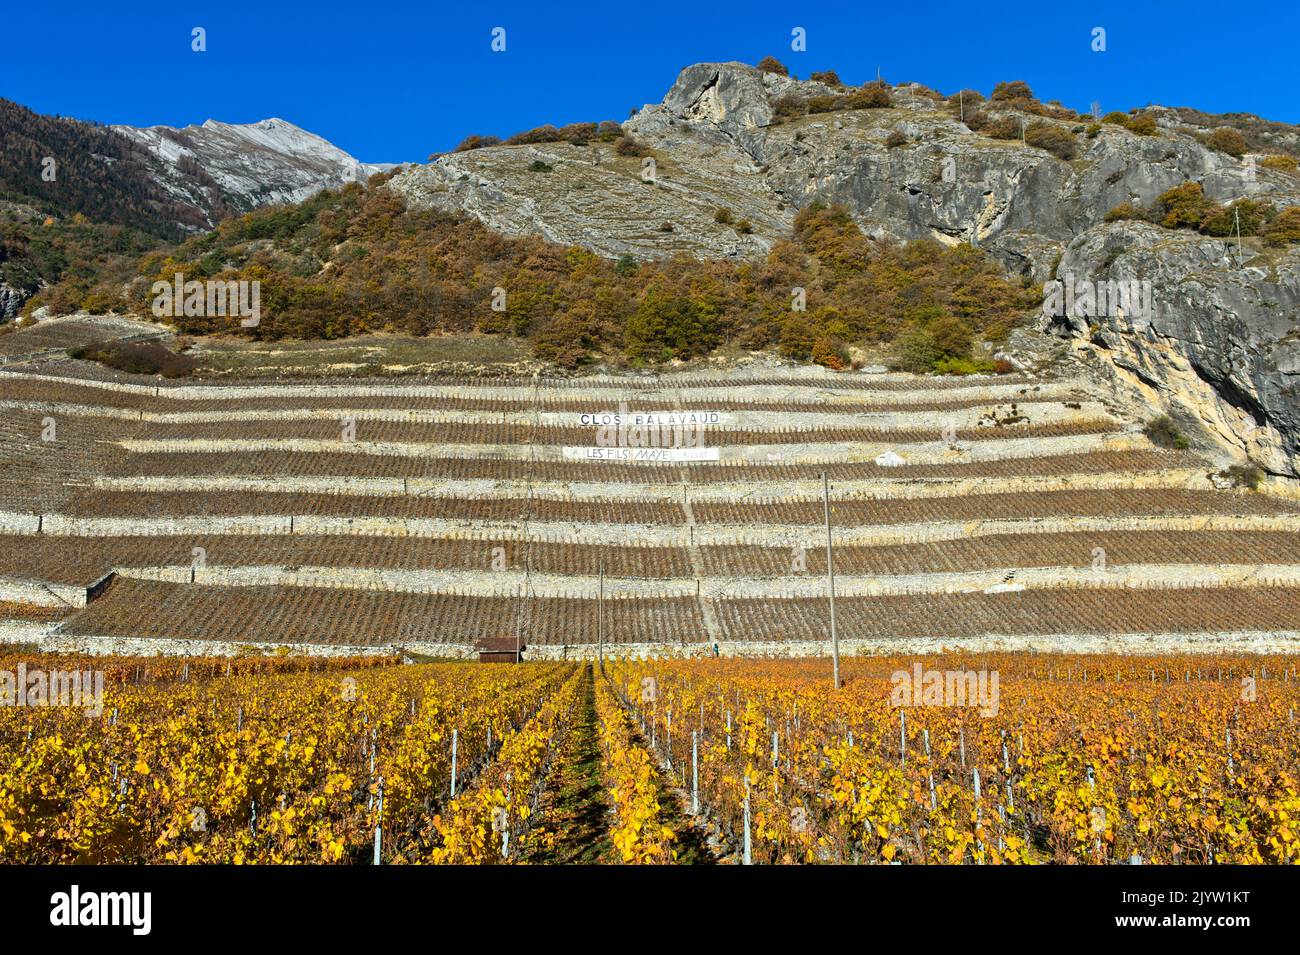 Vineyard terraces for the cultivation of the Clos de Balavaud white wine of the Fils Maye winery, Vétroz, Valais, Switzerland Stock Photo